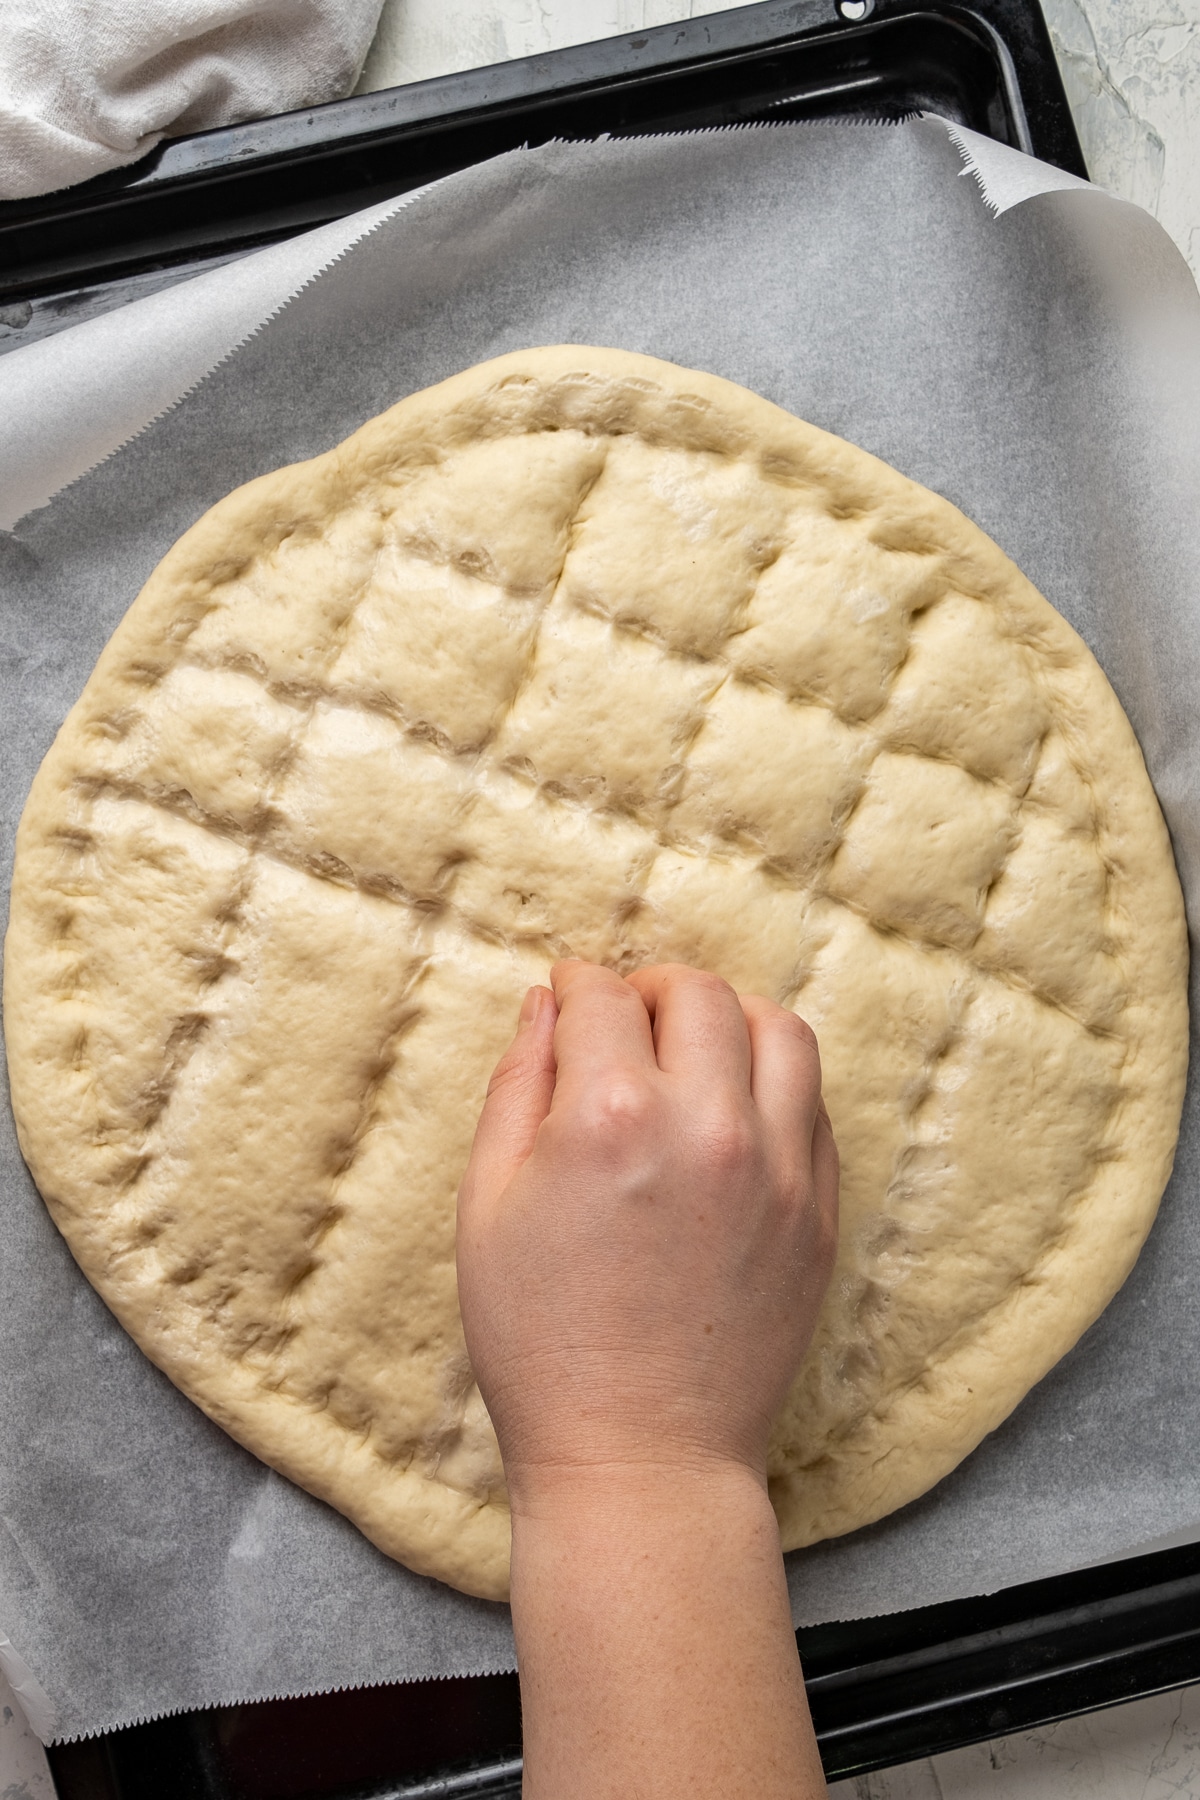 A hand shaping pide bread dough on a baking sheet with finger tips.